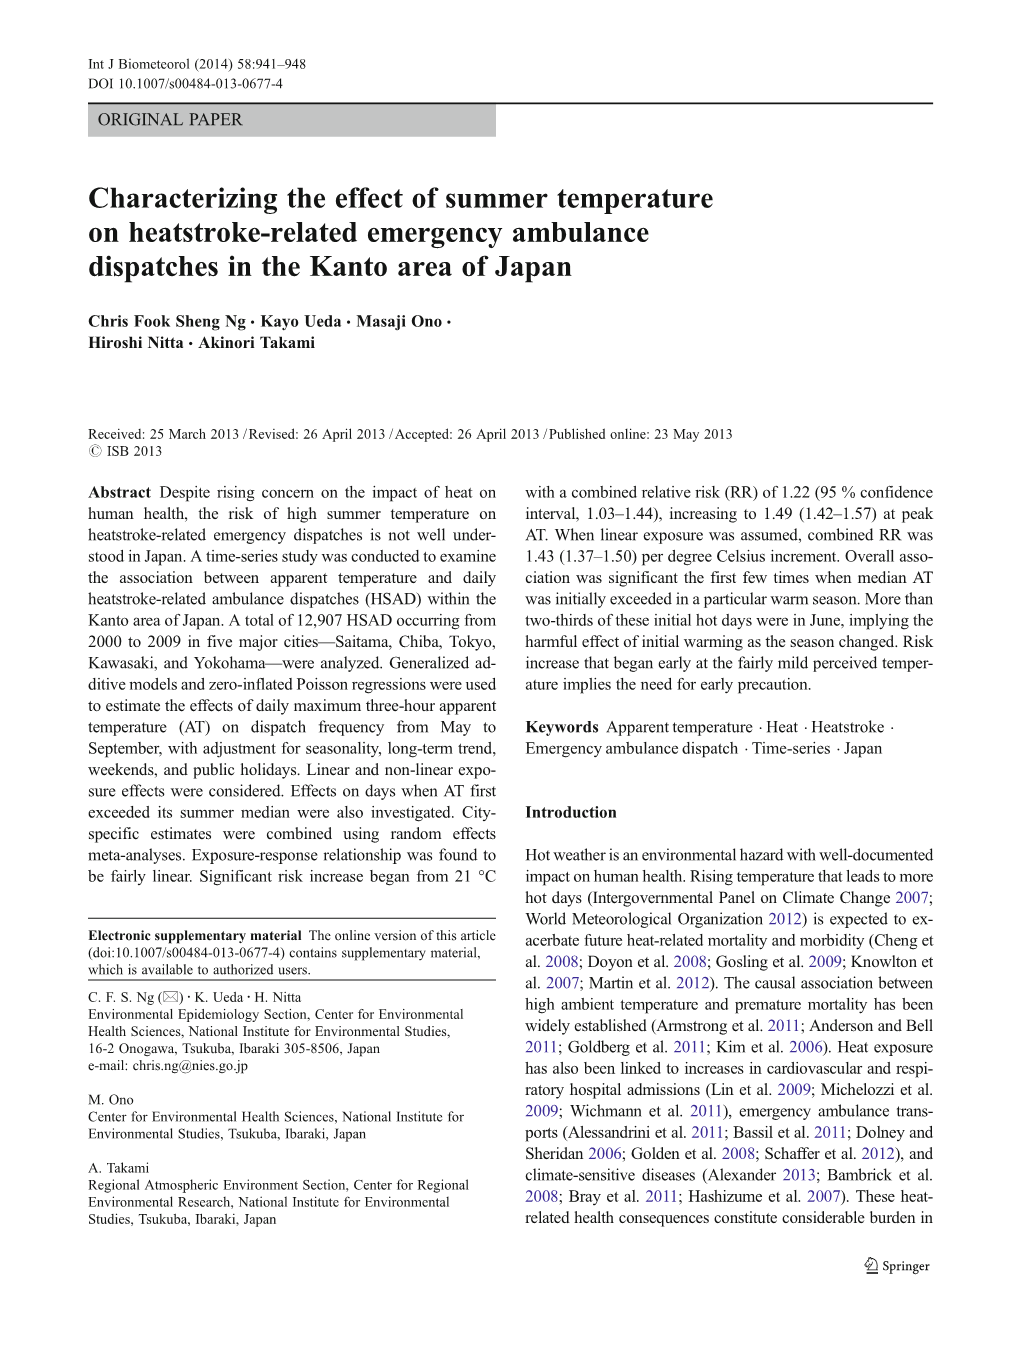 Characterizing the Effect of Summer Temperature on Heatstroke-Related Emergency Ambulance Dispatches in the Kanto Area of Japan